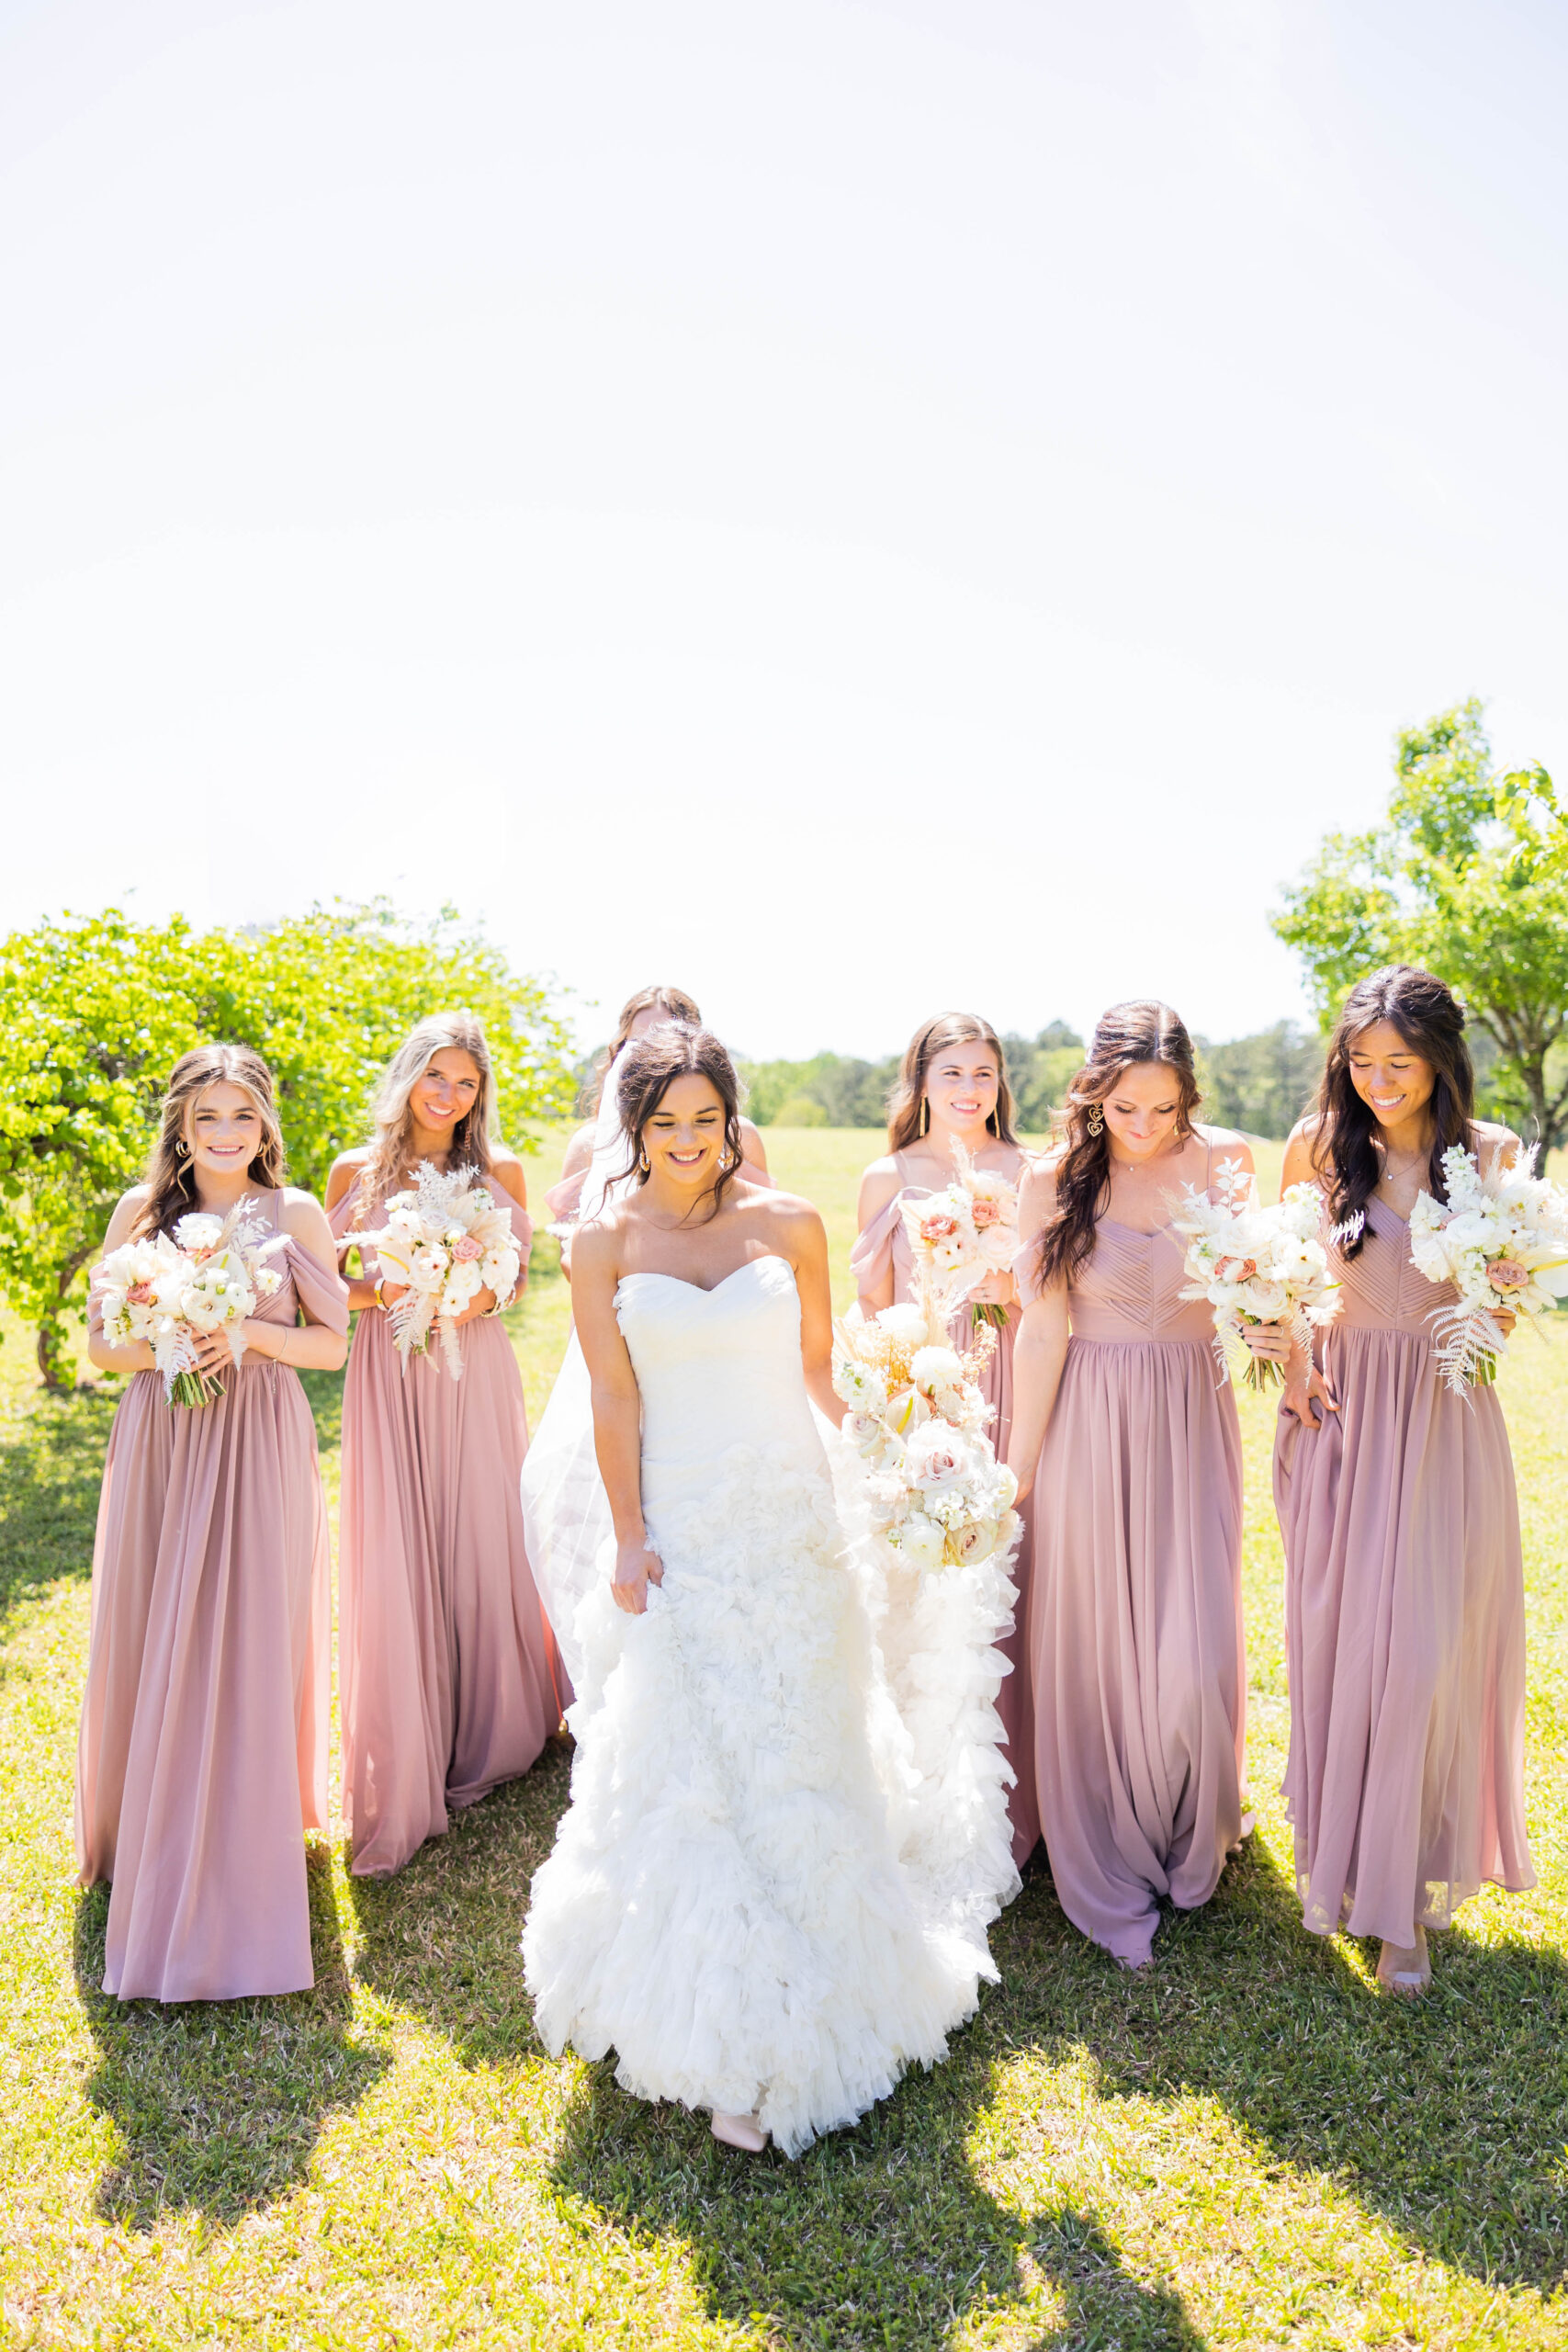 Eleanor Stenner Photography - a wedding photographer in Birmingham, AL - shares tips on how to be the best Maid of Honor!